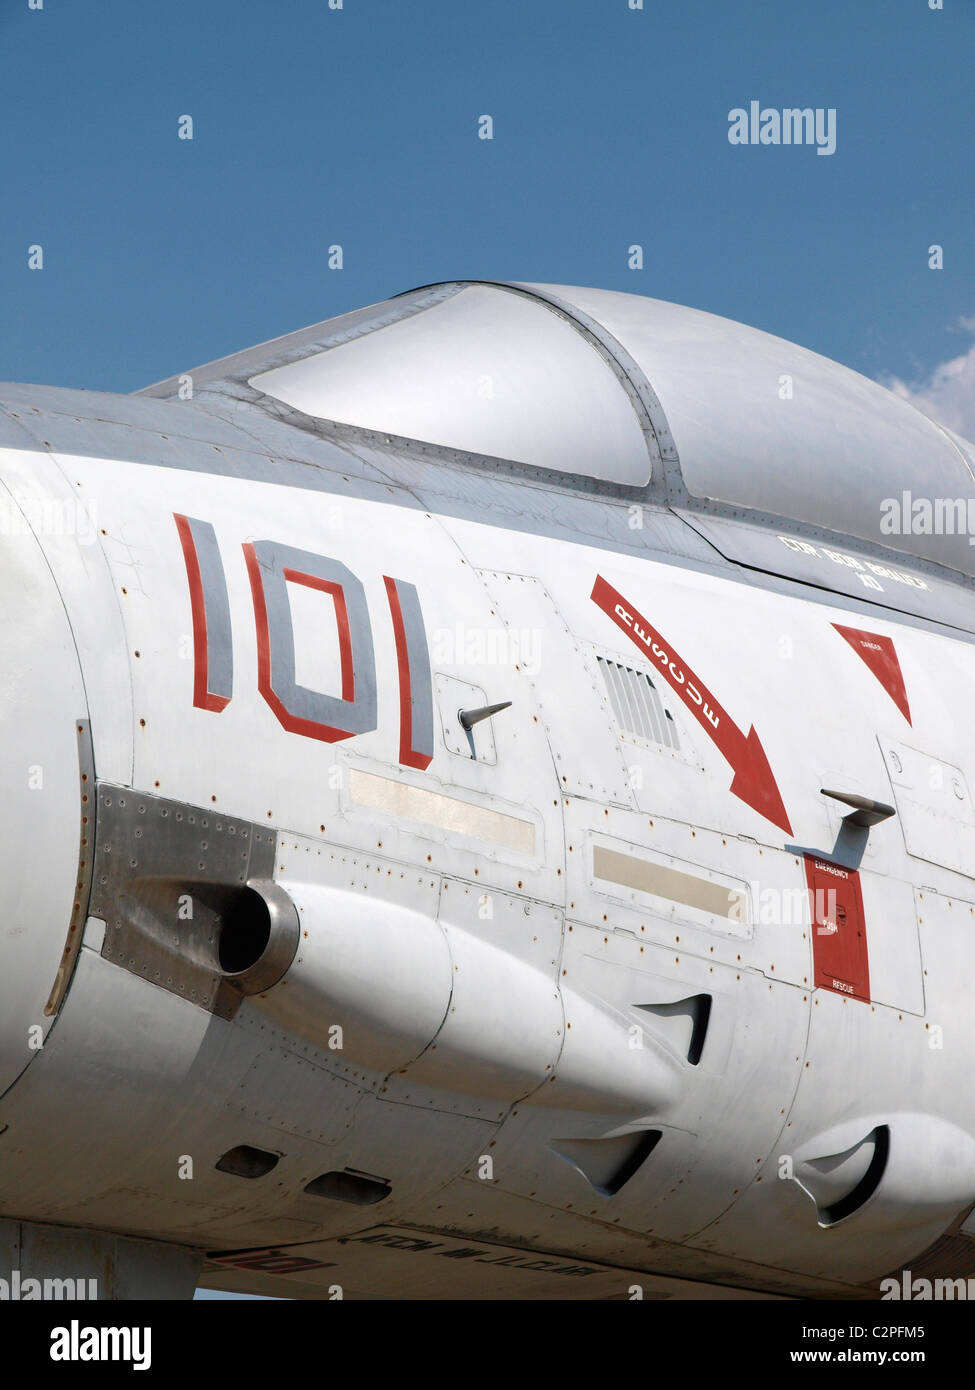 Grumman F-14A Tomcat fighter aircraft at the Palm Springs Air Museum, California, USA. Stock Photo